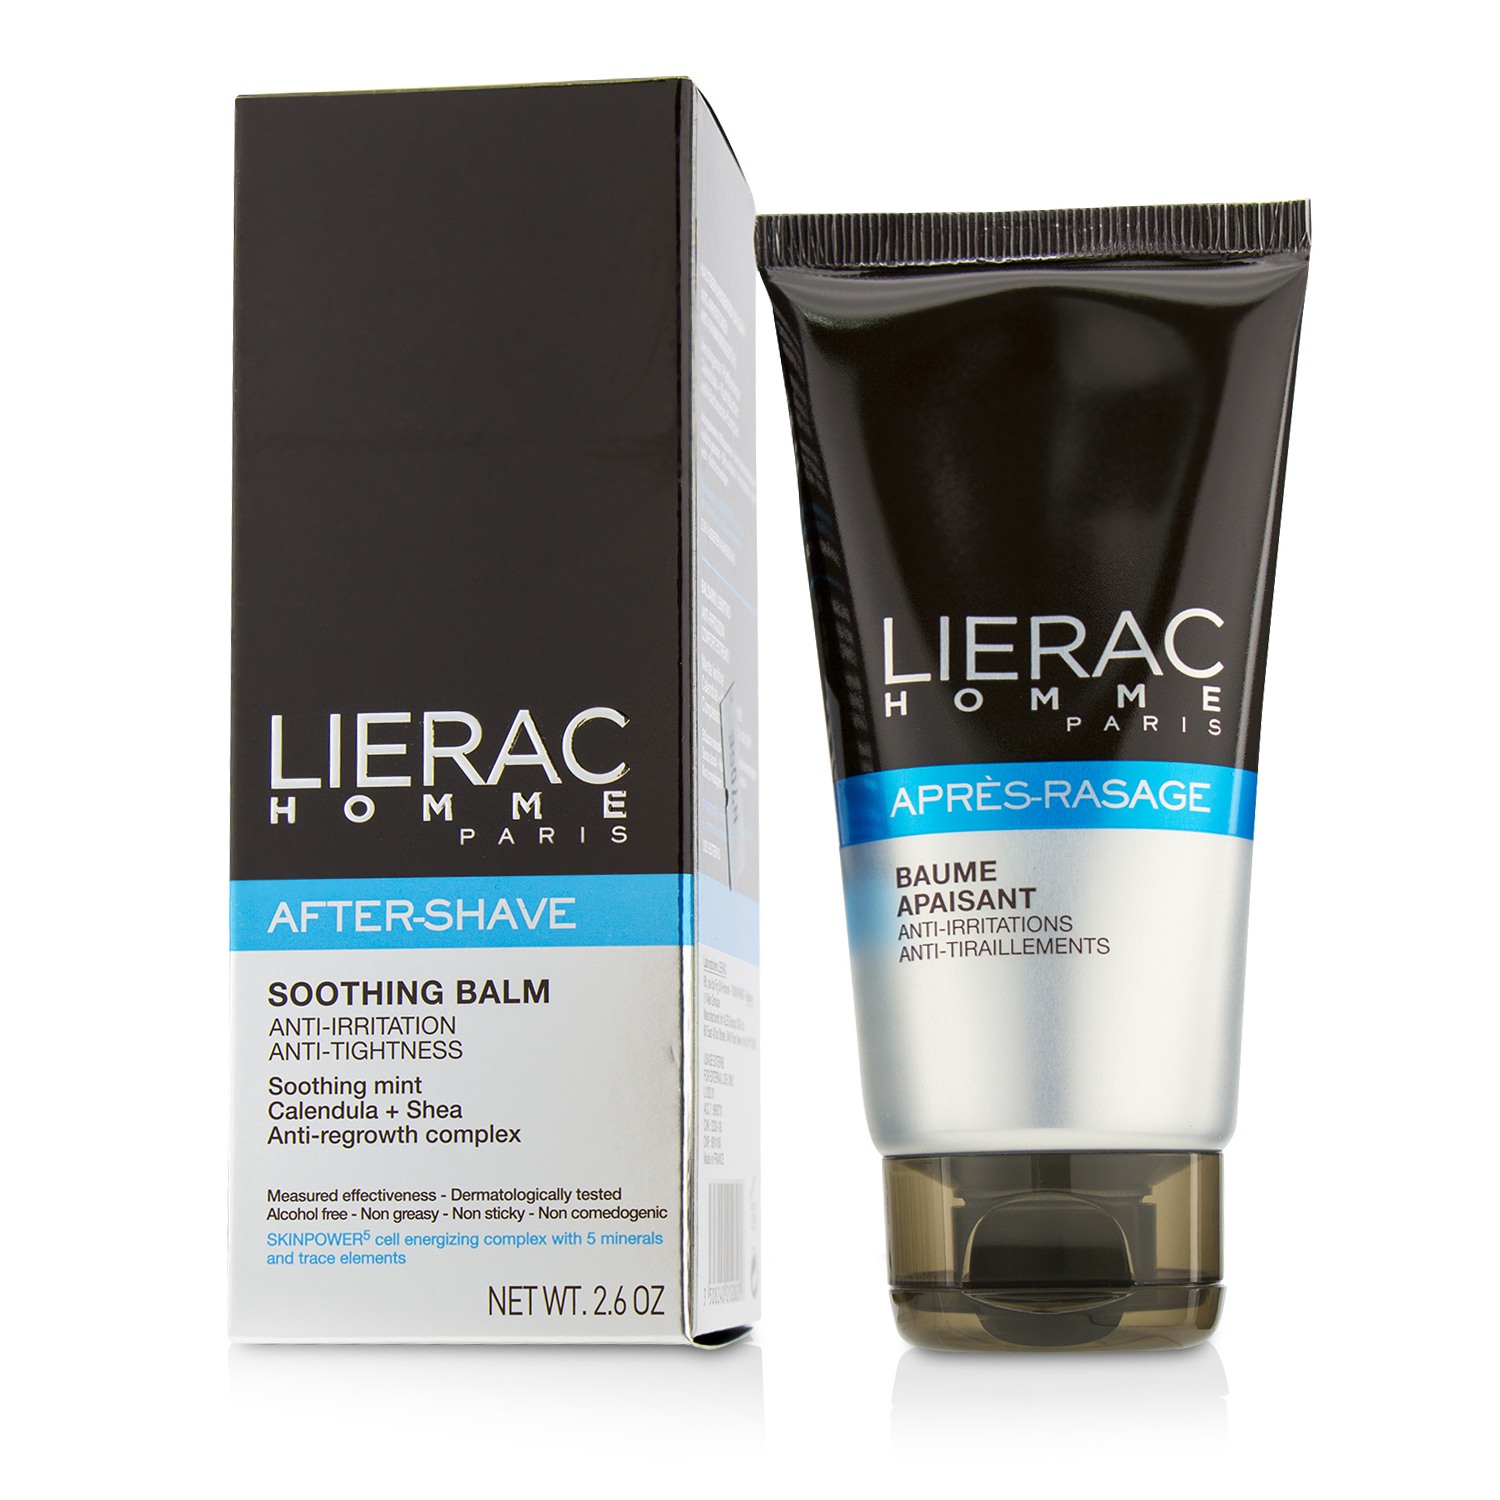 Homme After-Shave Soothing Balm Lierac Image